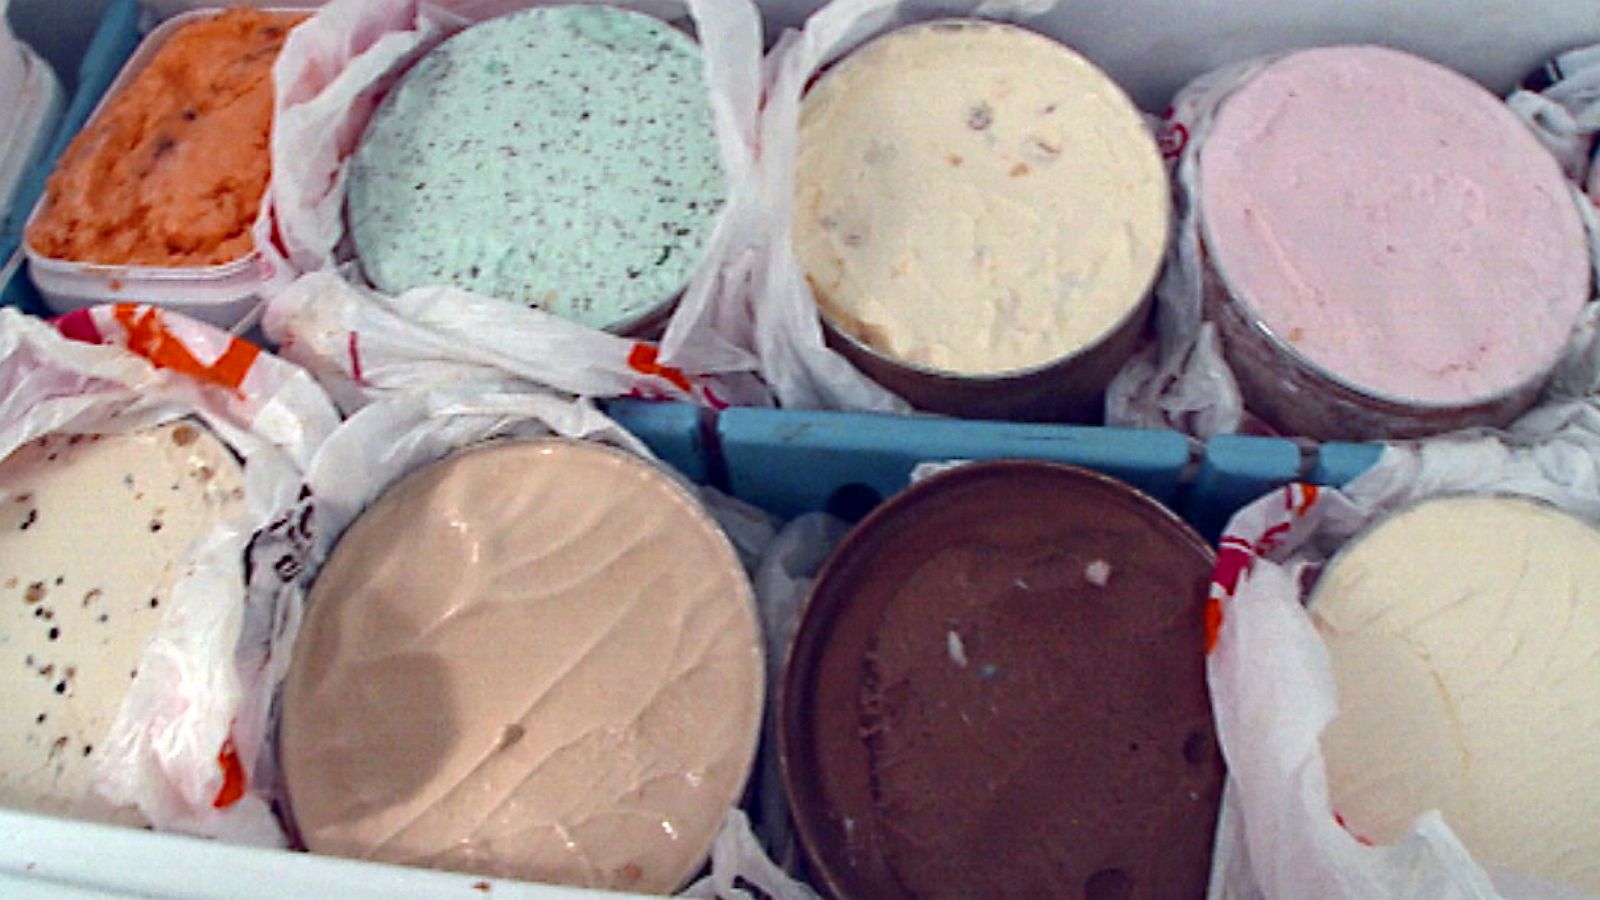 BASKIN-ROBBINS REVEALS WHAT YOUR FAVORITE ICE CREAM FLAVOR SAYS